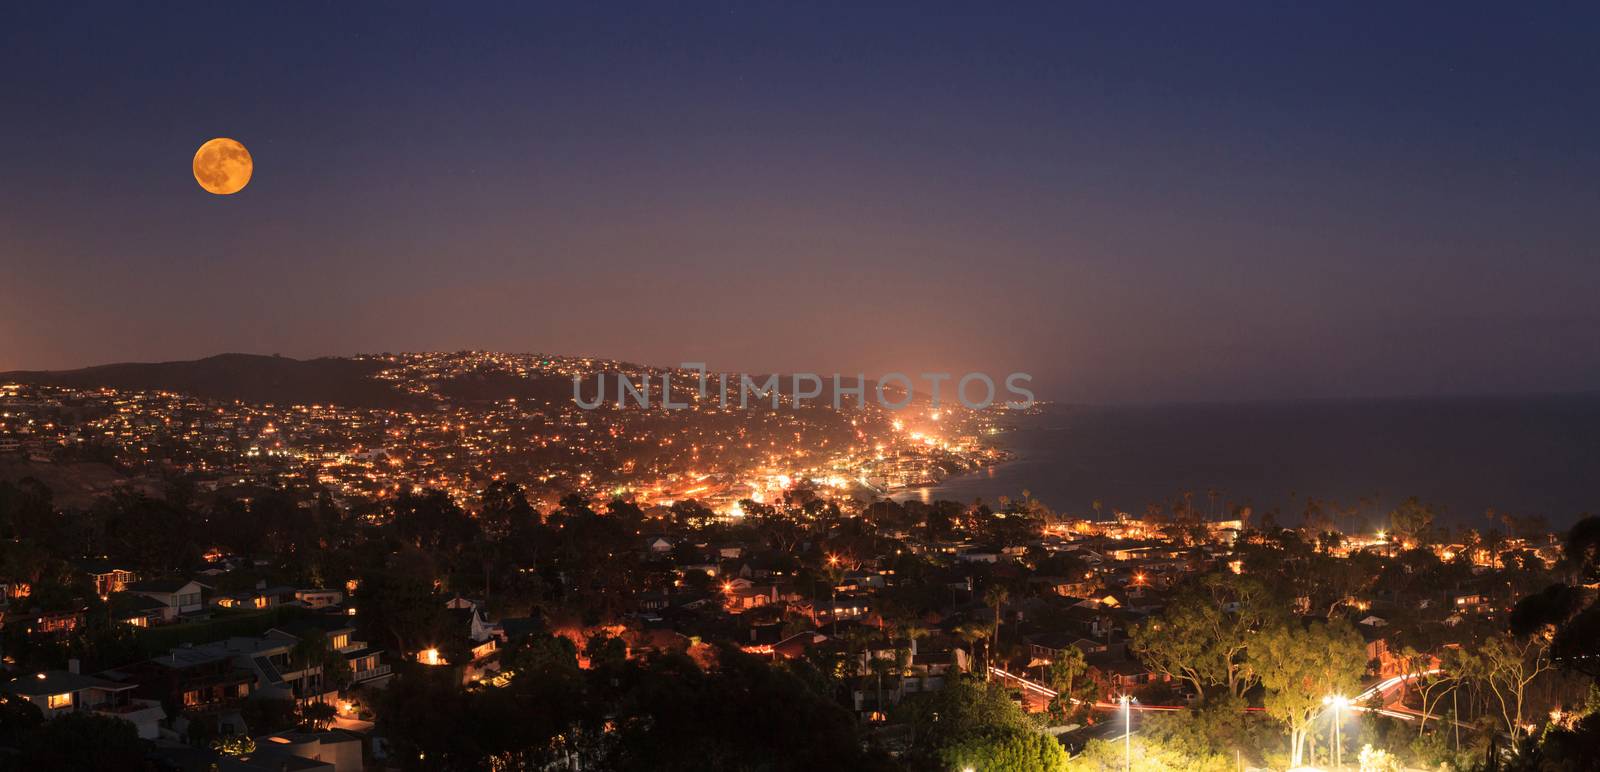 Moonrise of a full moon over the coastline of Laguna Beach, California, in summer on a clear night with city lights in the distance and the ocean at sunset.